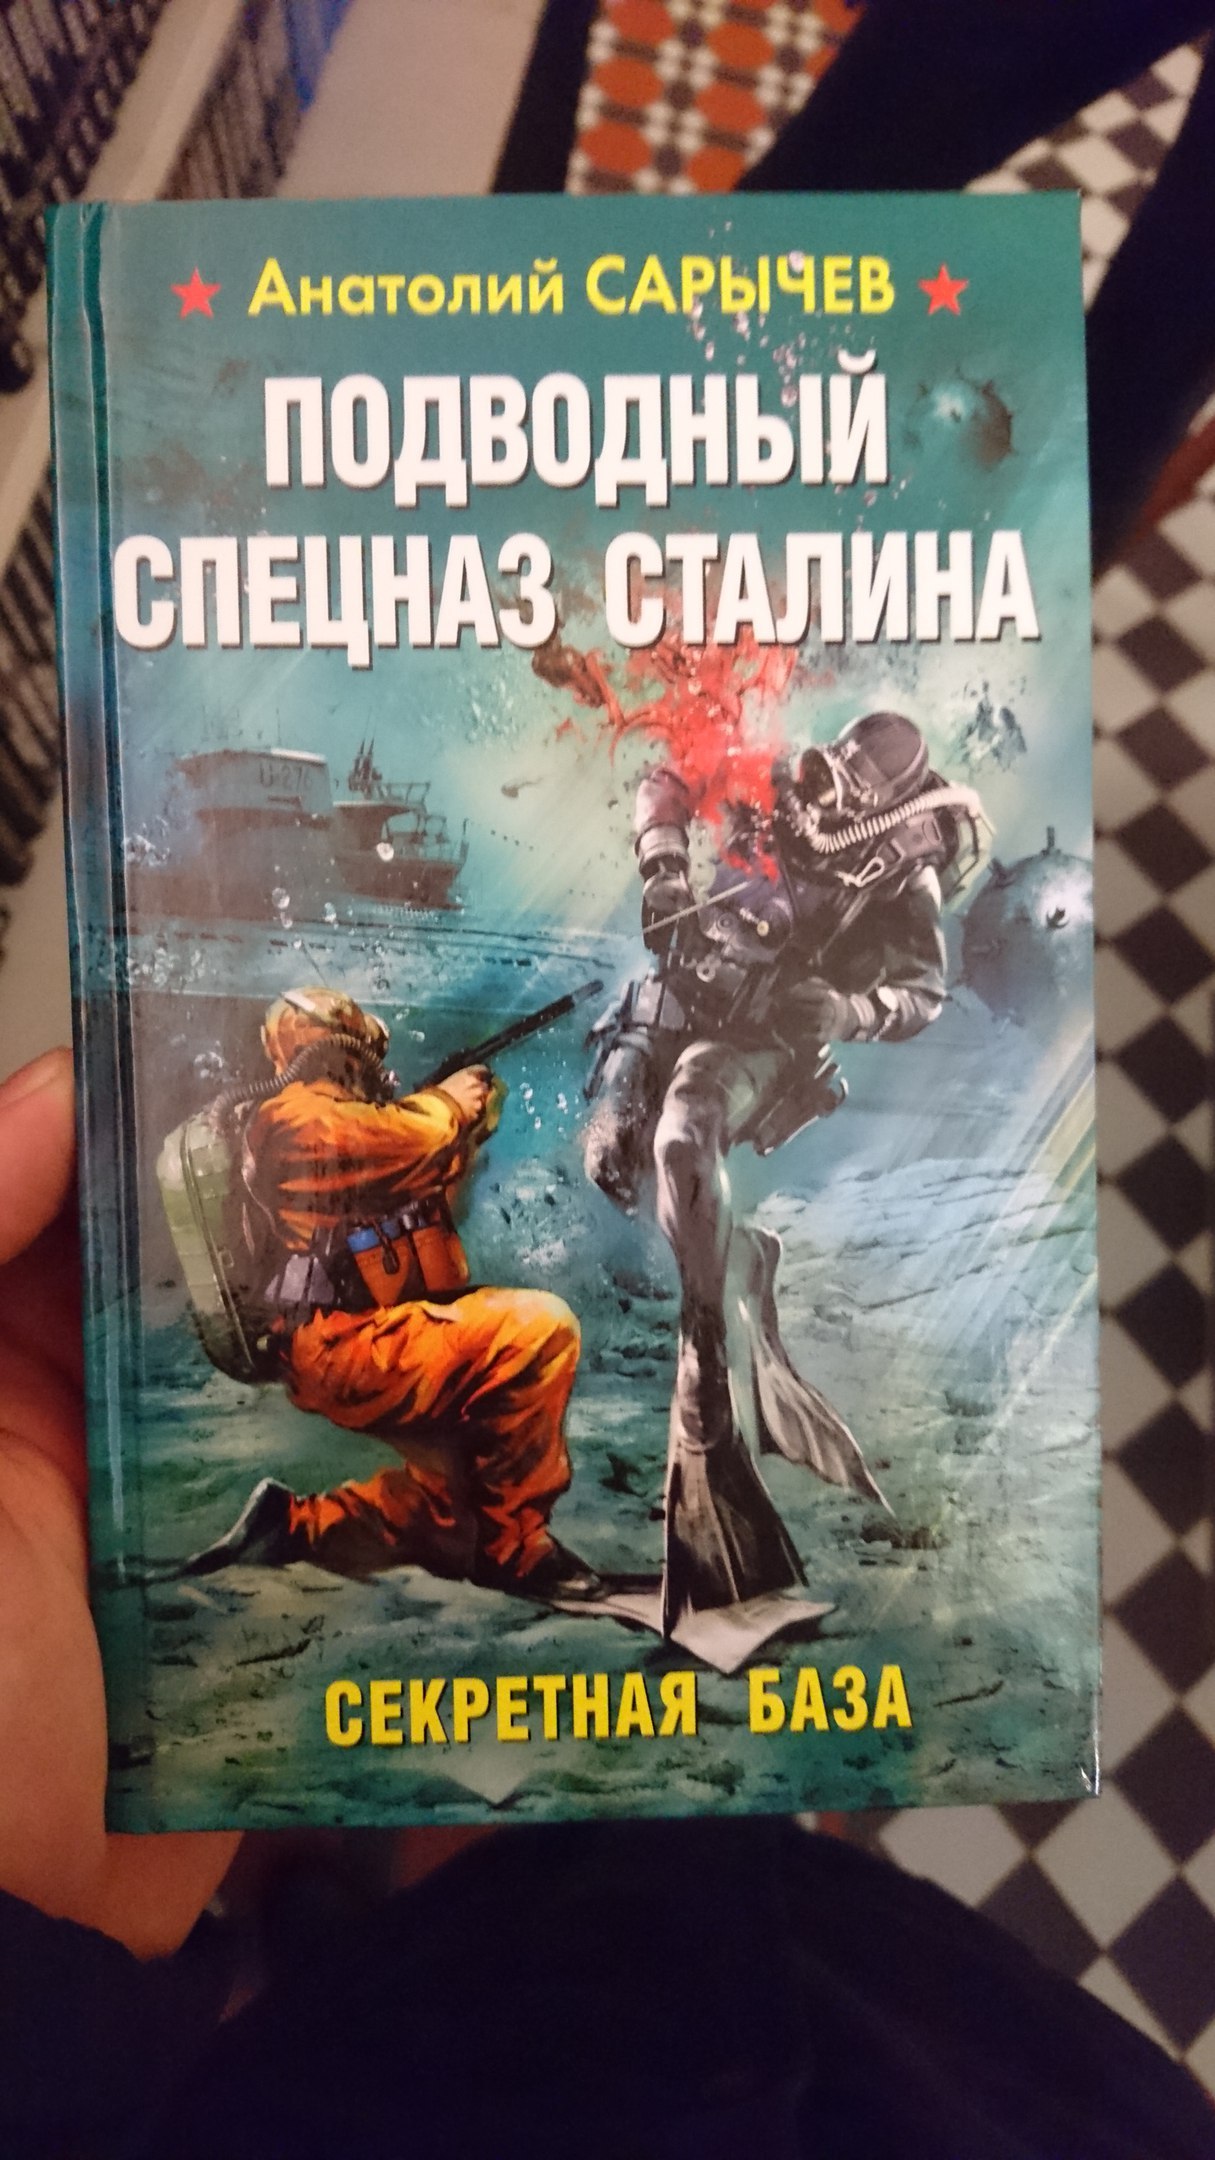 Traveled covers of Russian science fiction - Longpost, Just a very long post, Cover, Bottom, Popadantsy, Stalin, Russian fiction